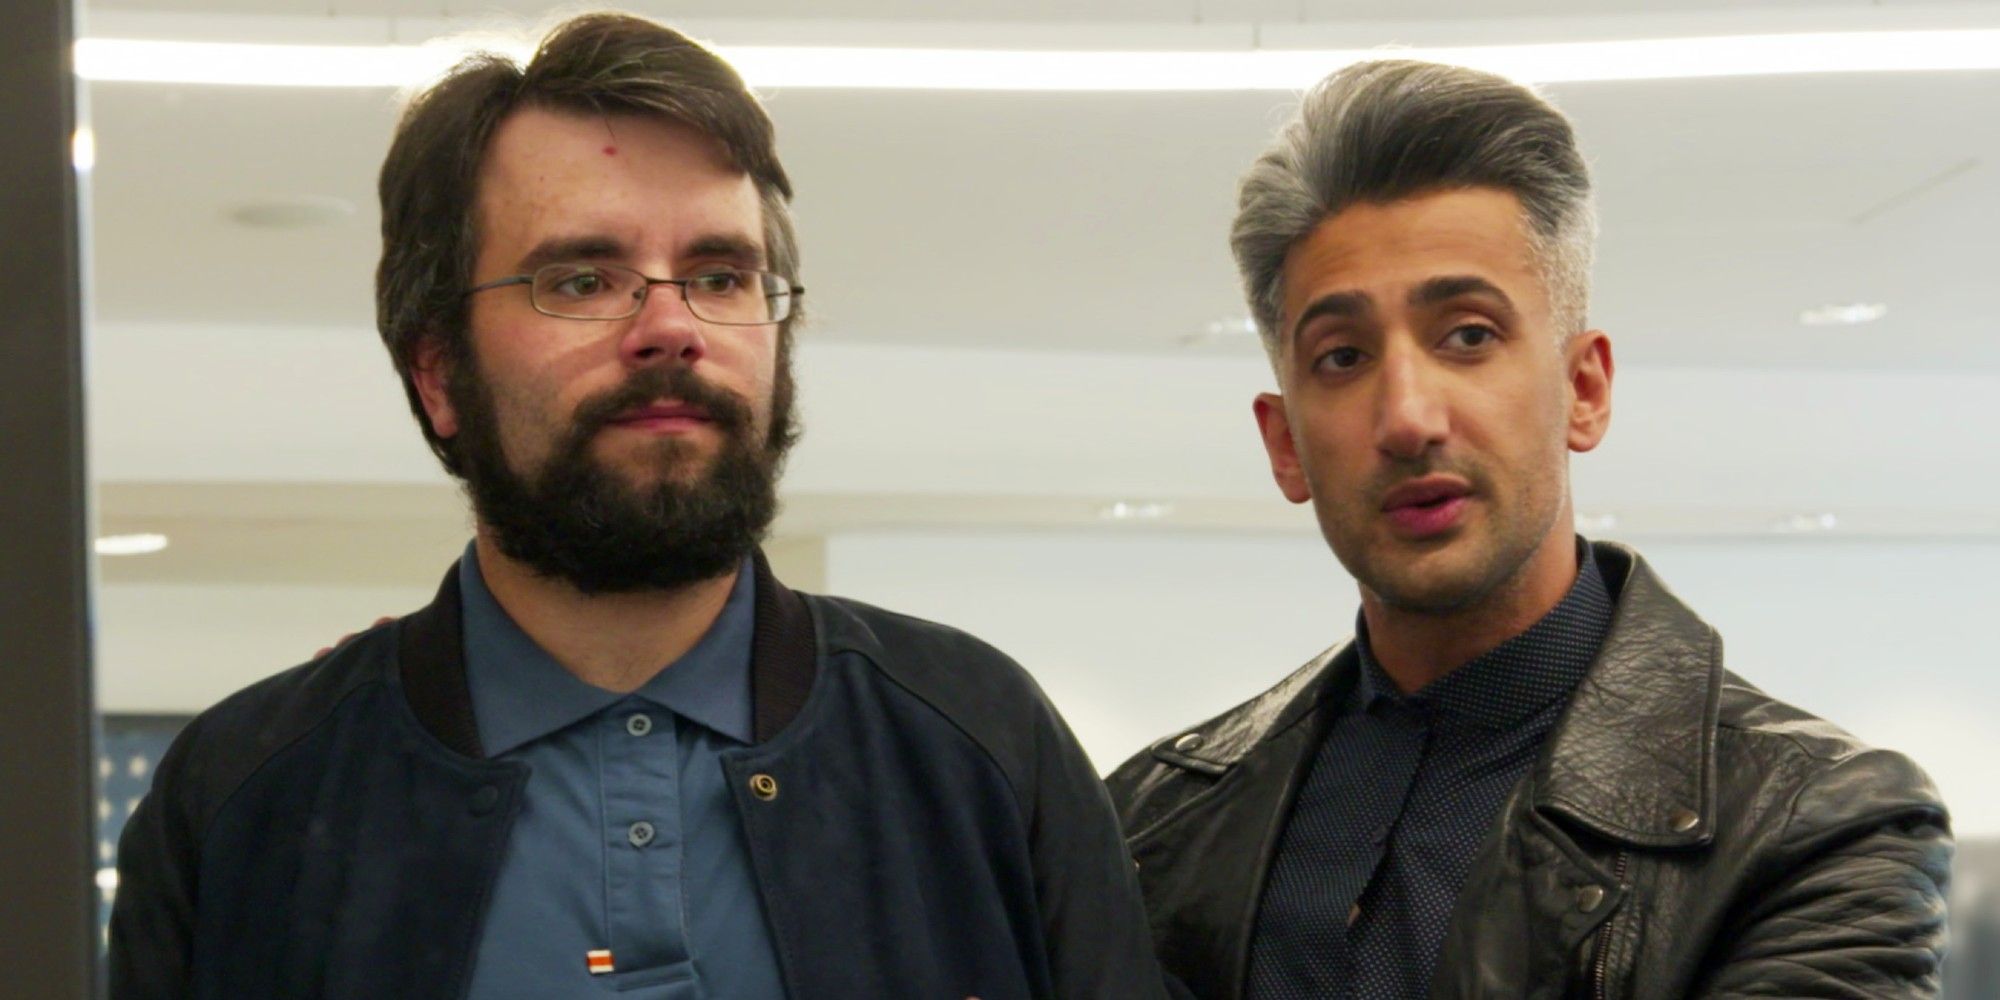 Joe Gallois and Tan France look at a mirror in Netflix's Queer Eye.